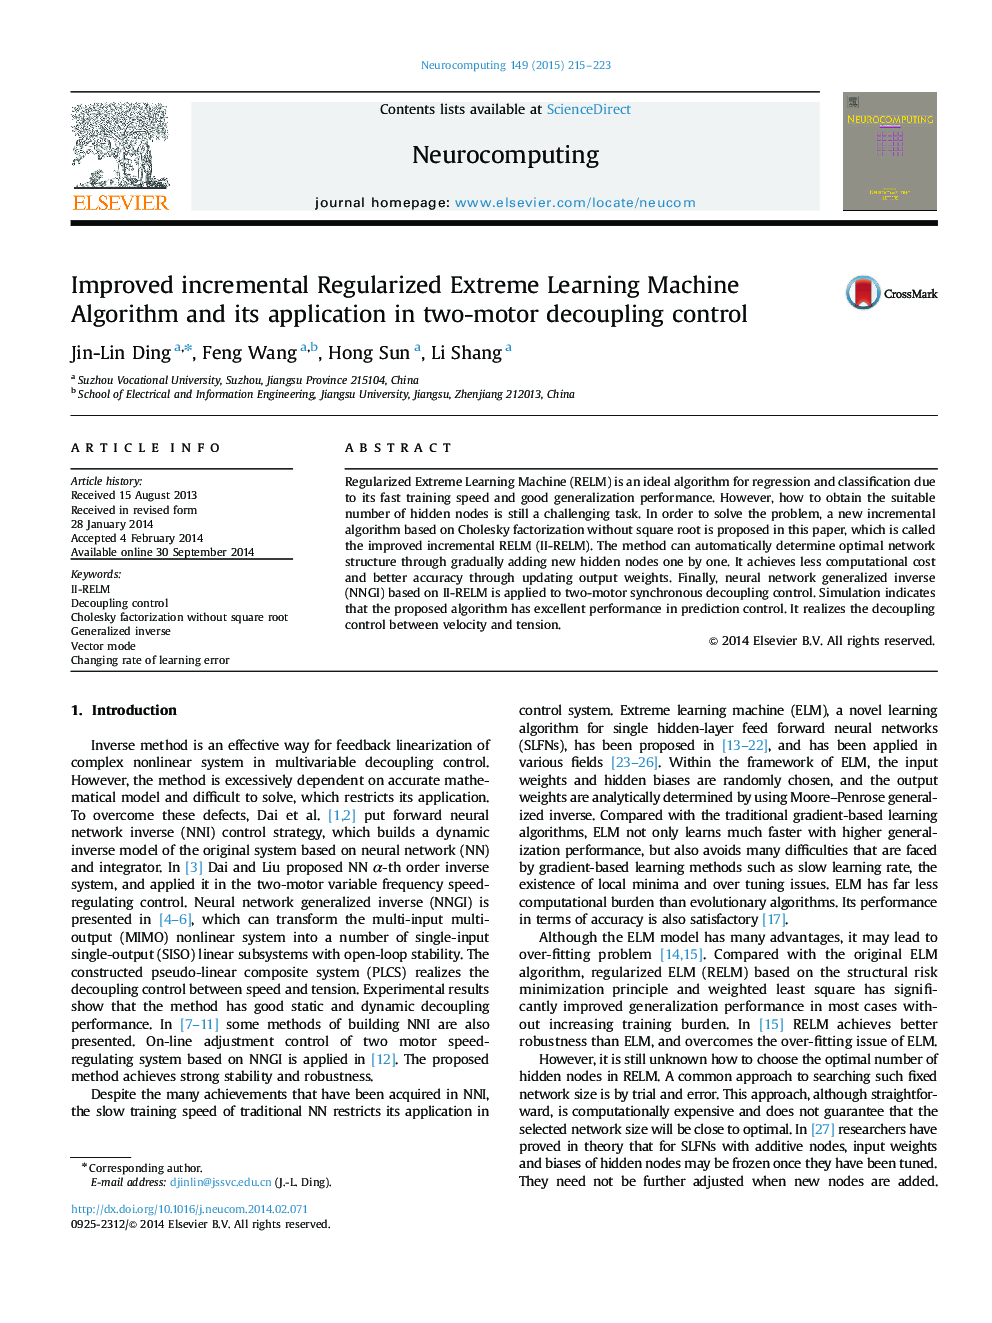 Improved incremental Regularized Extreme Learning Machine Algorithm and its application in two-motor decoupling control